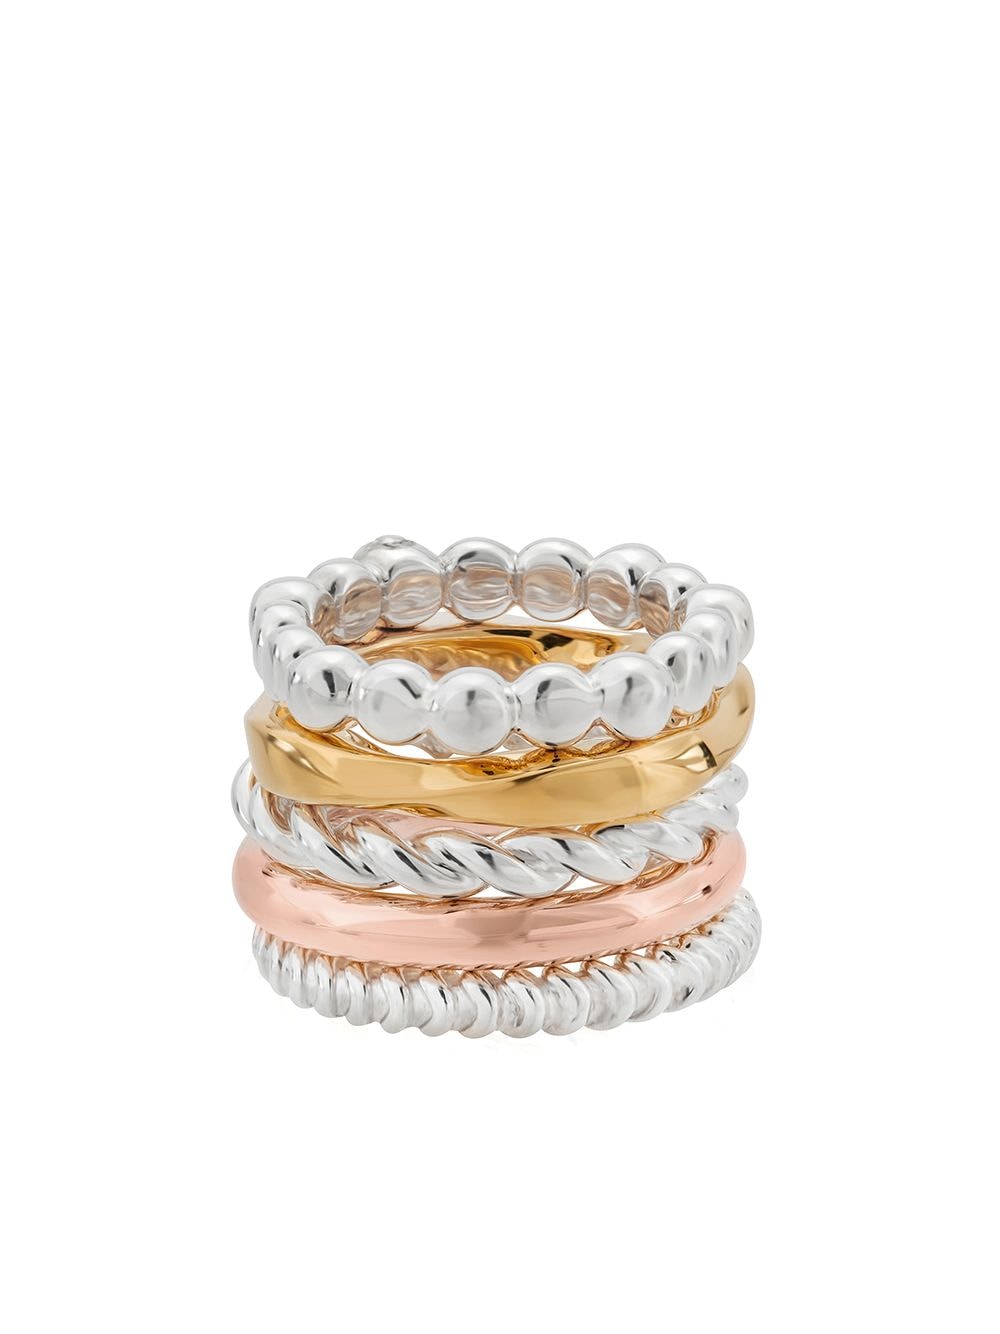 sterling silver and 23kt yellow and rose gold vermeil Alma stacked rings